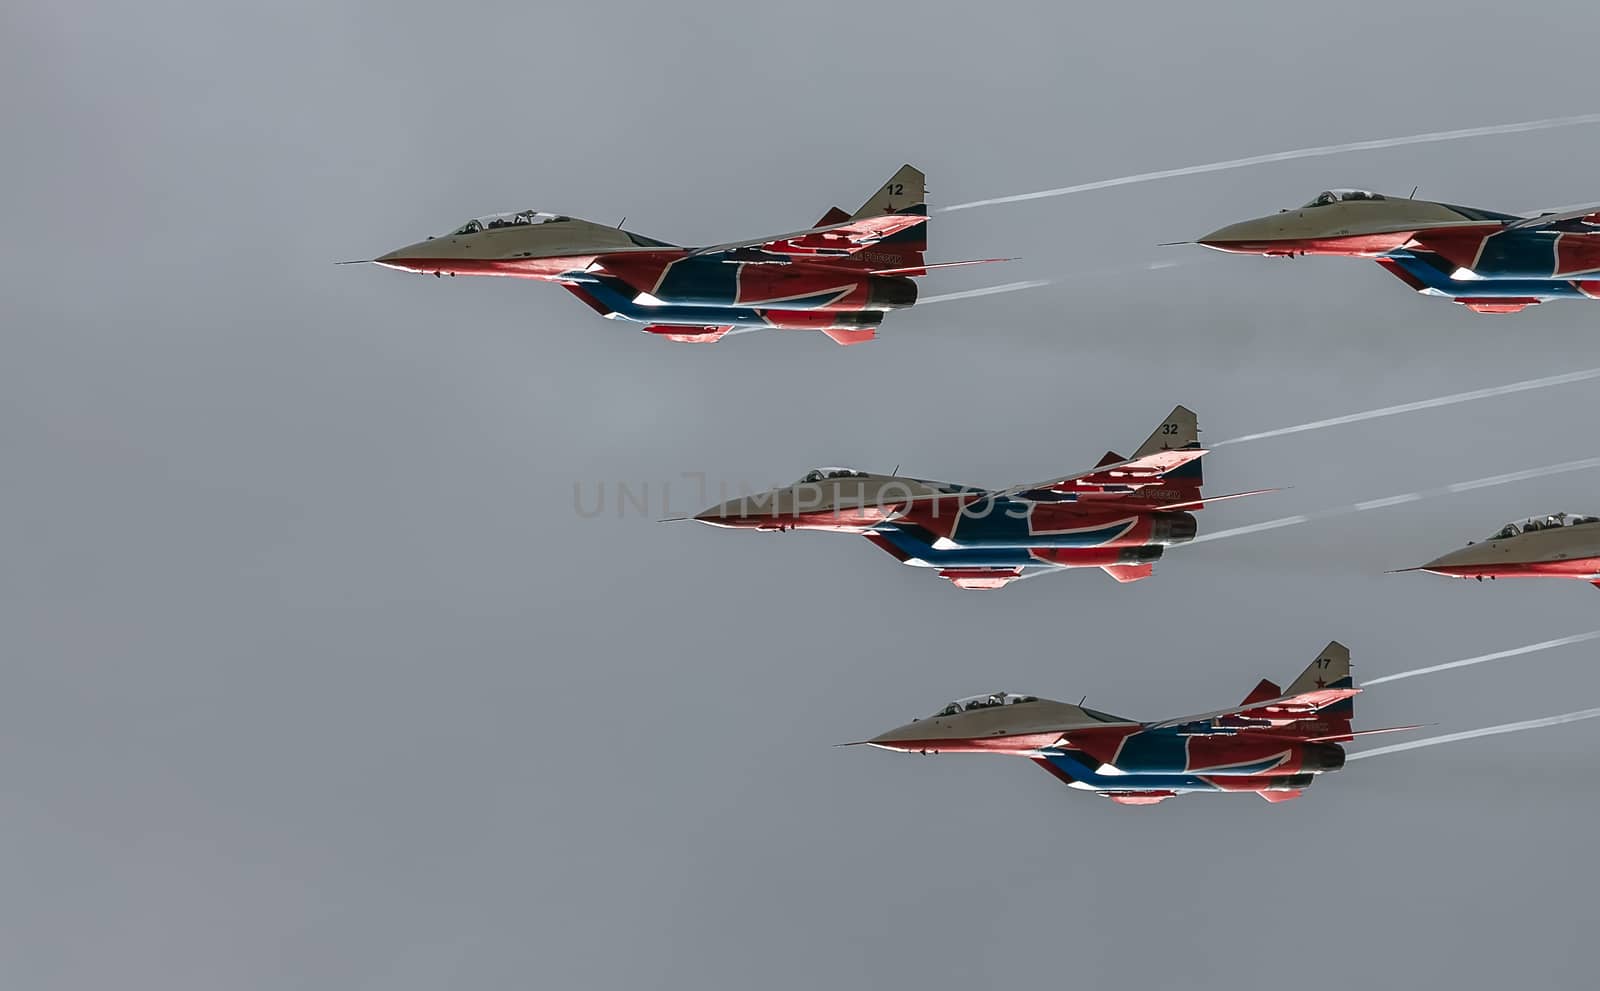 Barnaul, Russia - September 18, 2020: A low angle close-up shot of Strizhi MiG-29 fighter jet squadron performing stunts during an aeroshow.